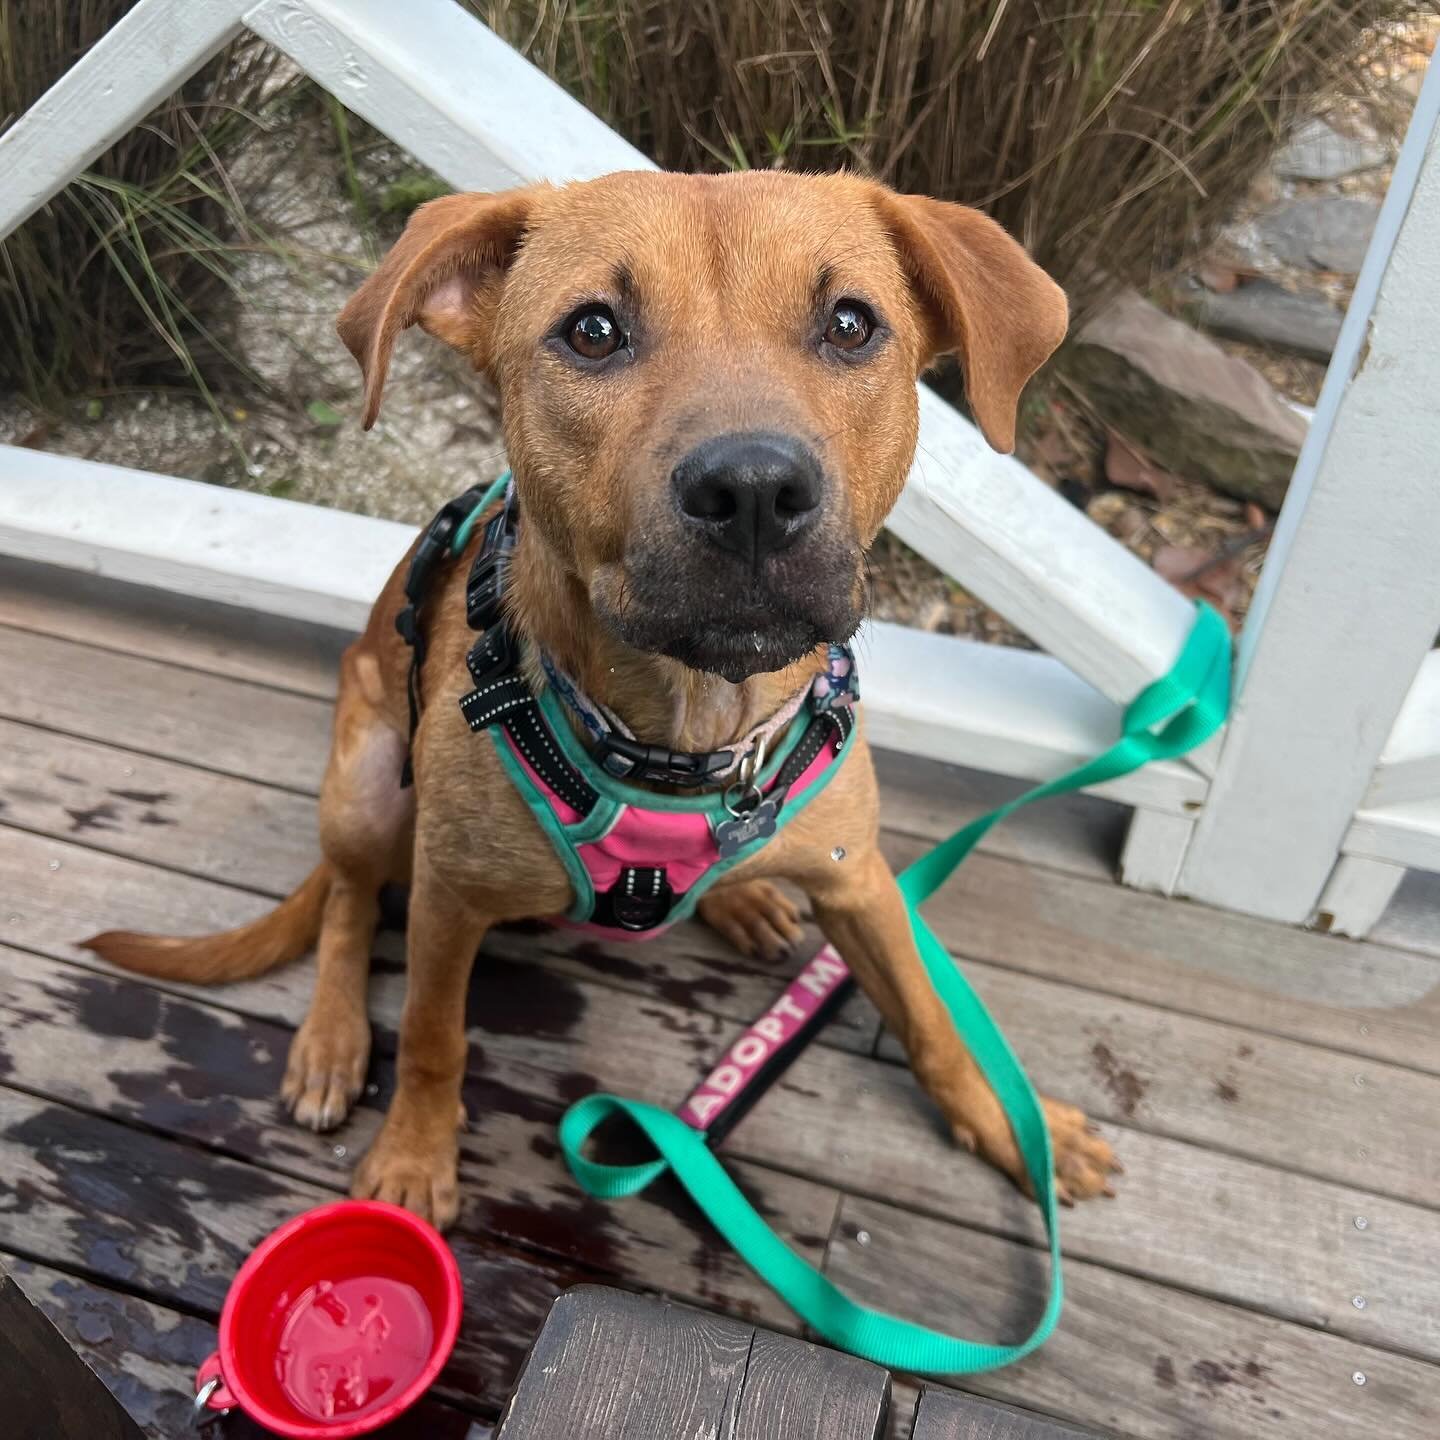 Are you looking for a cuddley loving pup to spend your days with? Well look no further cause we have the fruit for you❗️🍓 Strawberry lives up to her name, and is truly as sweet as can be. Berry has been having a blast working on building her confide